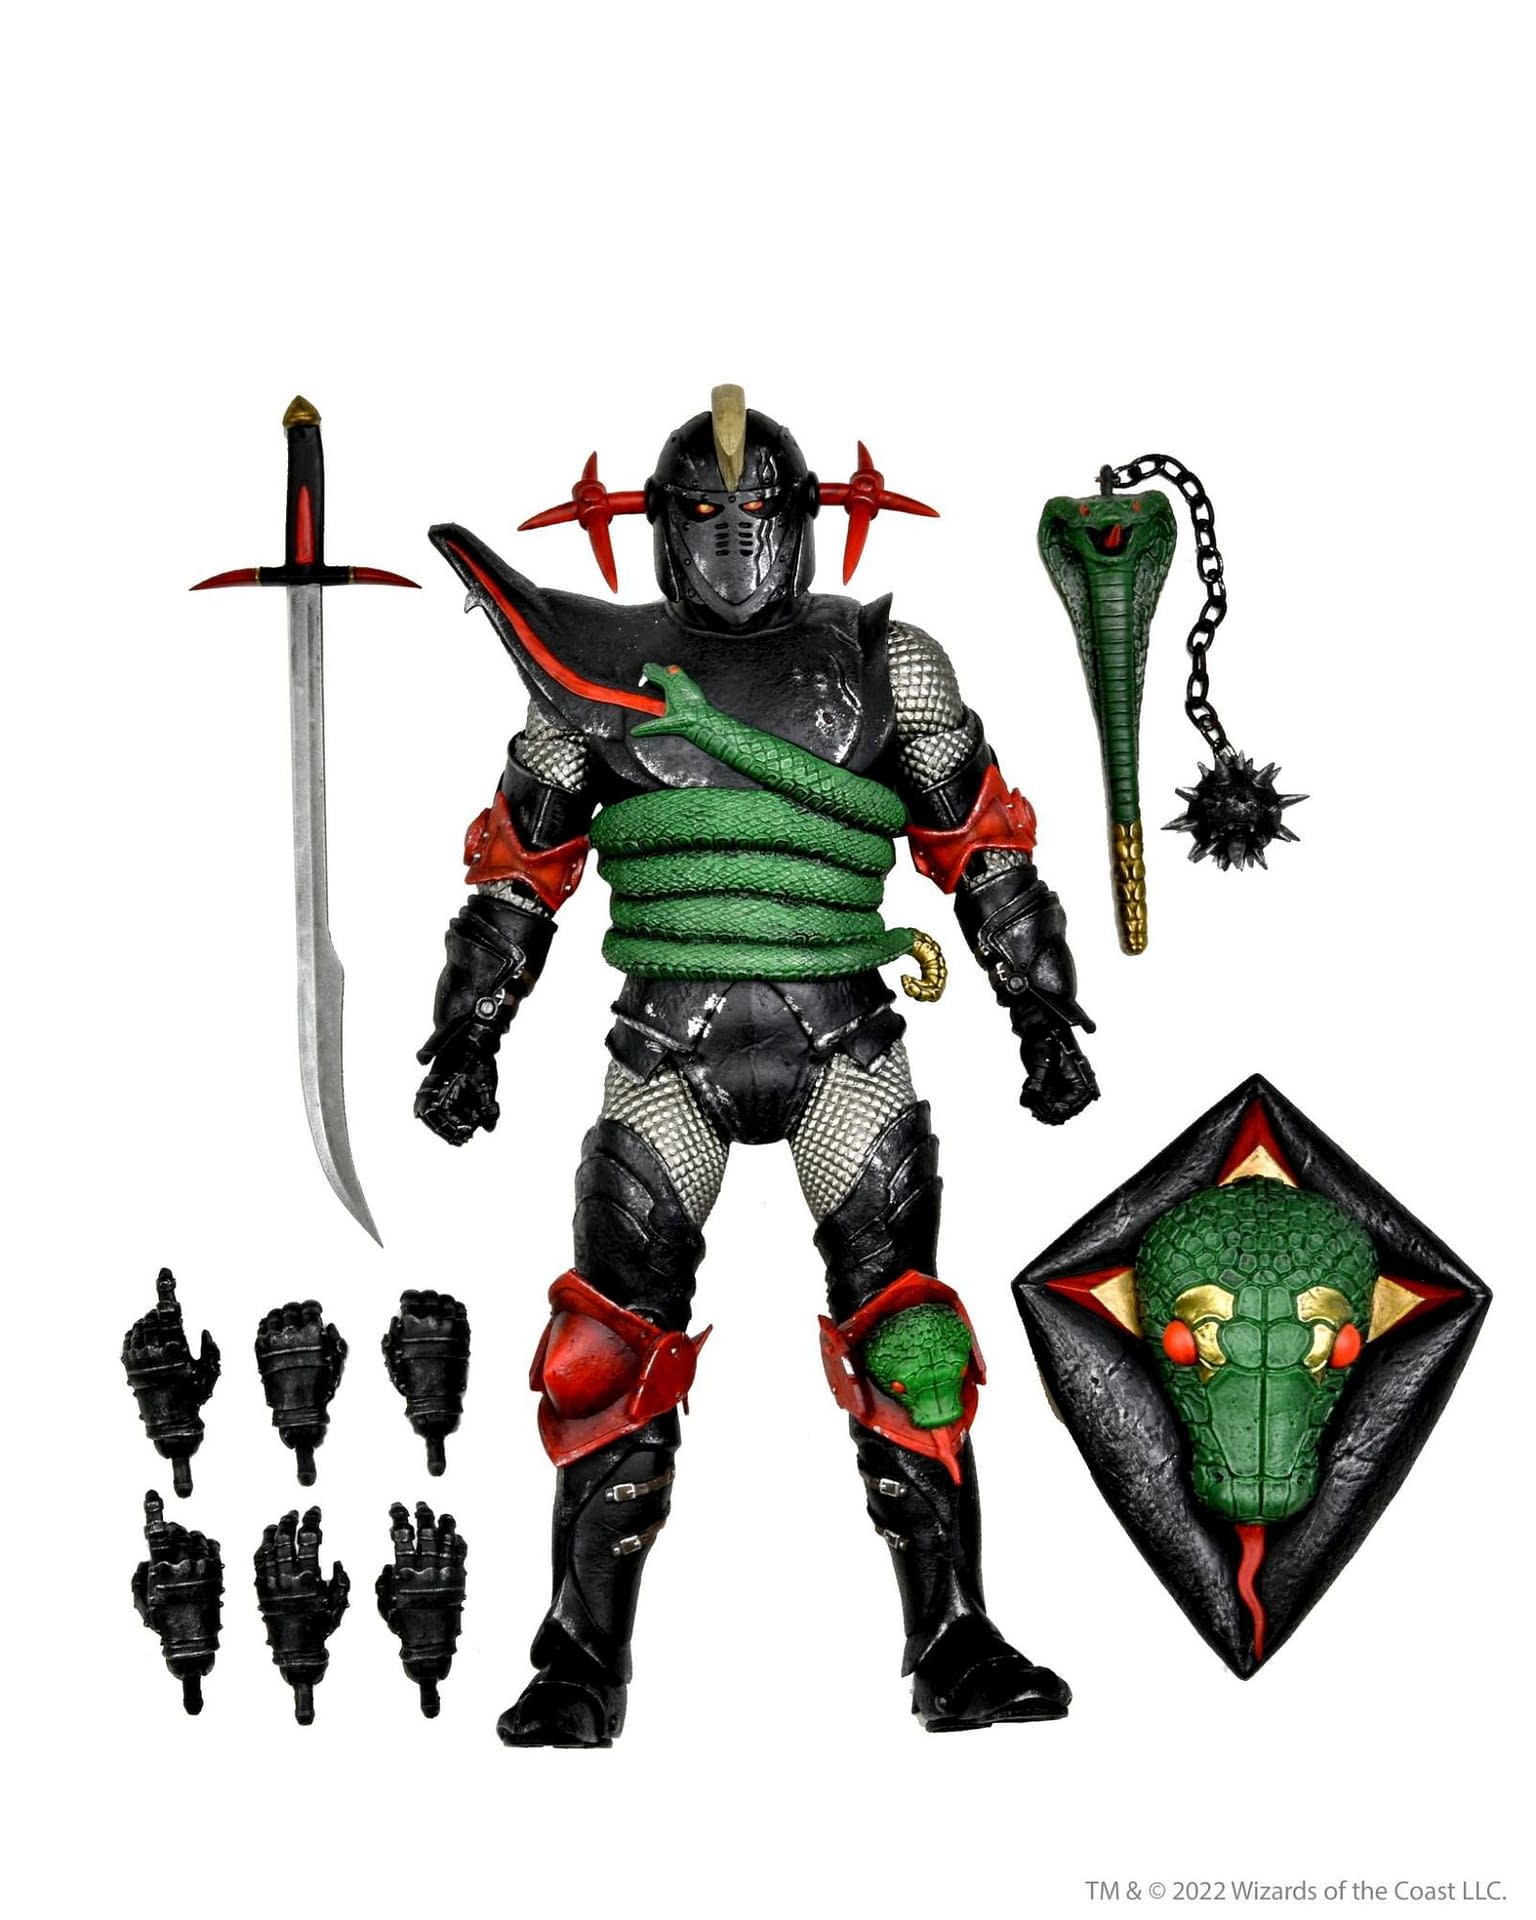 NECA Gives Collectors An Update on Dungeons & Dragons Figures 